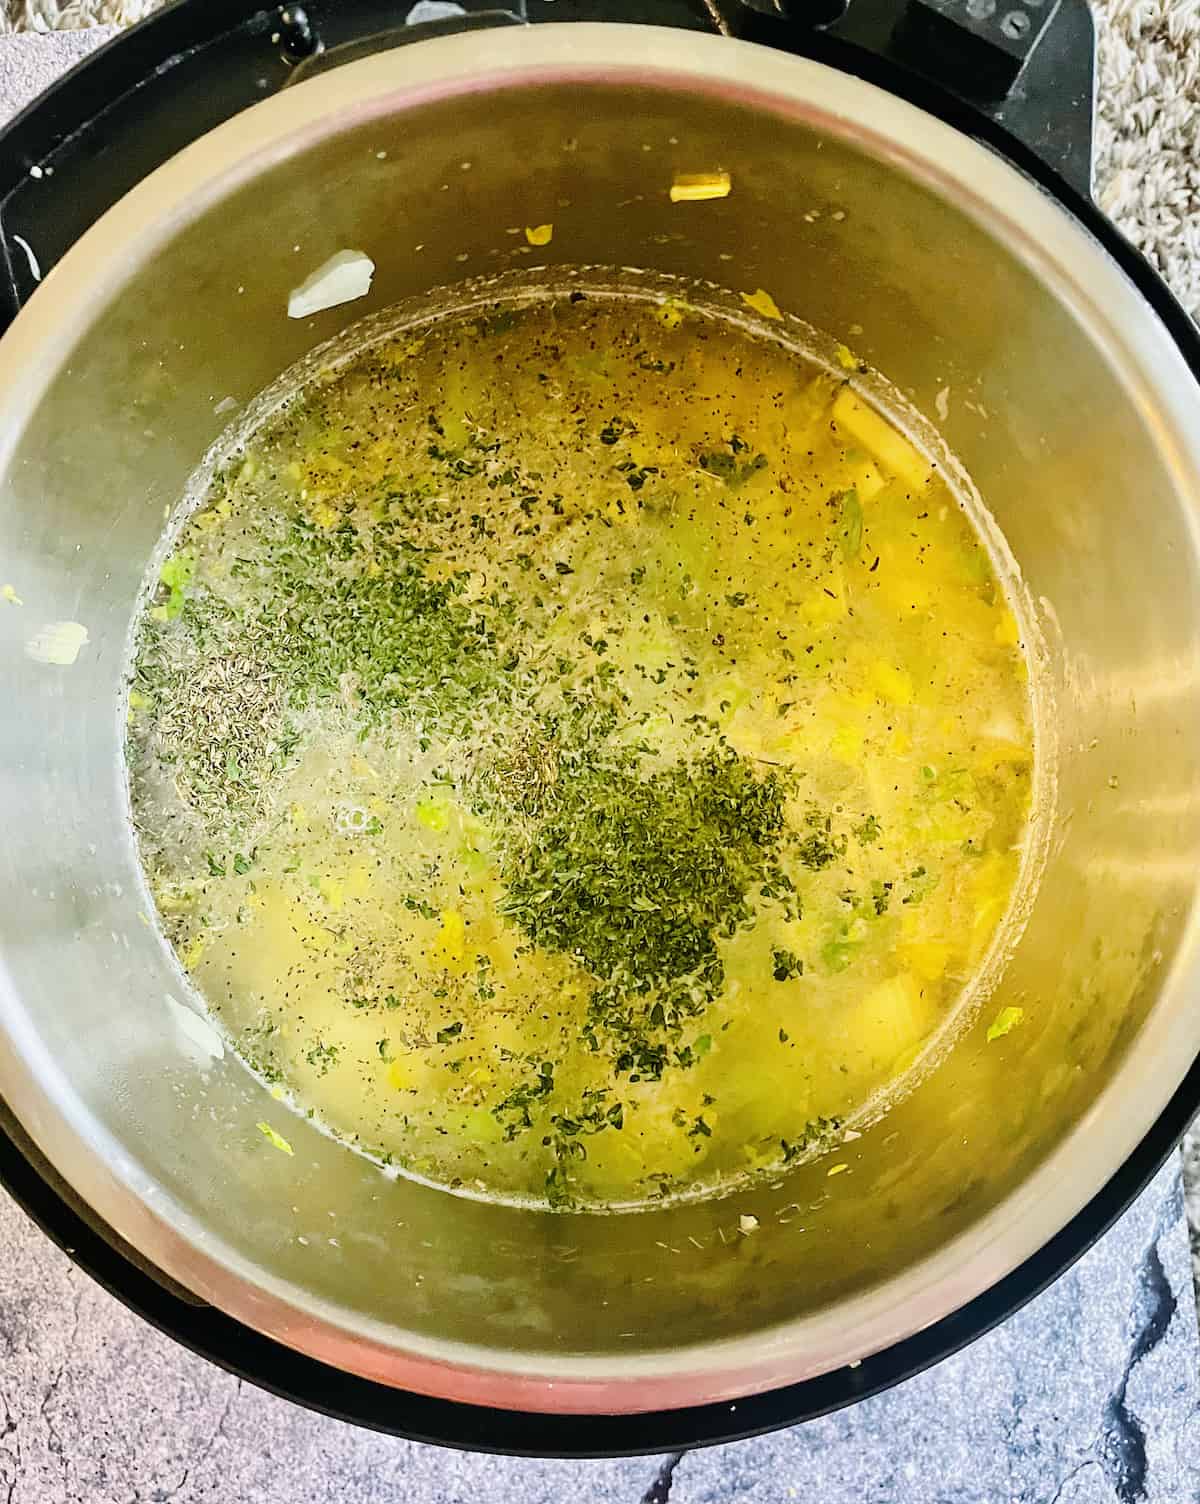 thyme, salt, pepper, broth, and potatoes in the pressure cooker